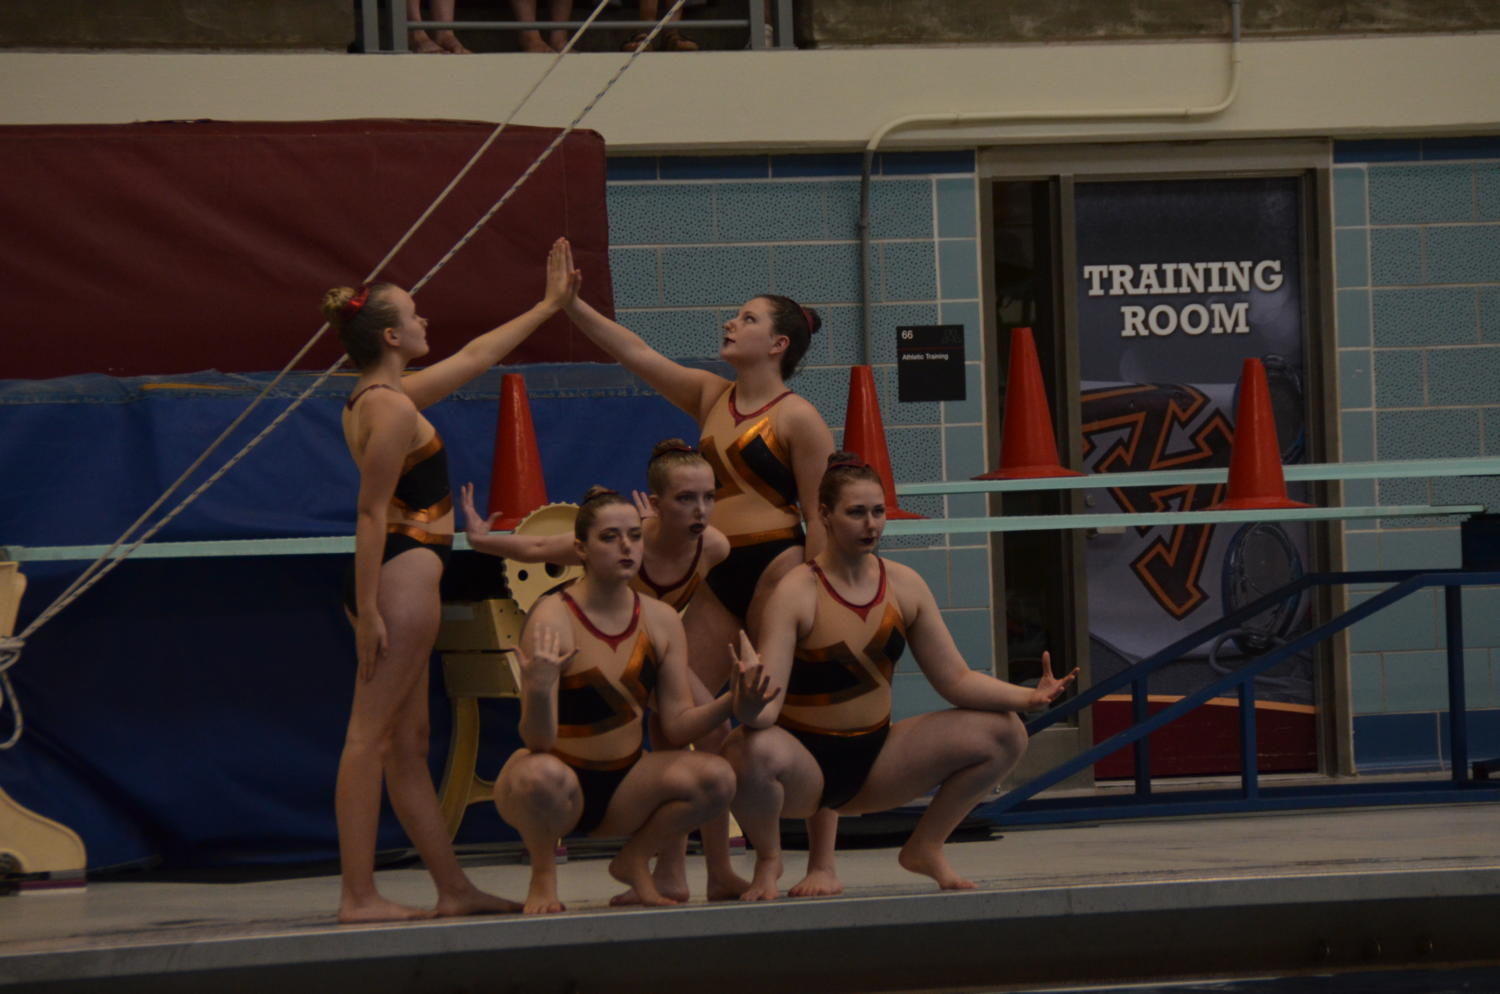 The Long division team of Elizabeth Coleman, Ellen Mattson, and Lily Provenzano, sophomores,  Lily Smith, junior, and Katie Gunderson, senior, performs their routine Battle Cry at the 2017 Minnesota Synchronized Swimming State Invitational on May 26.